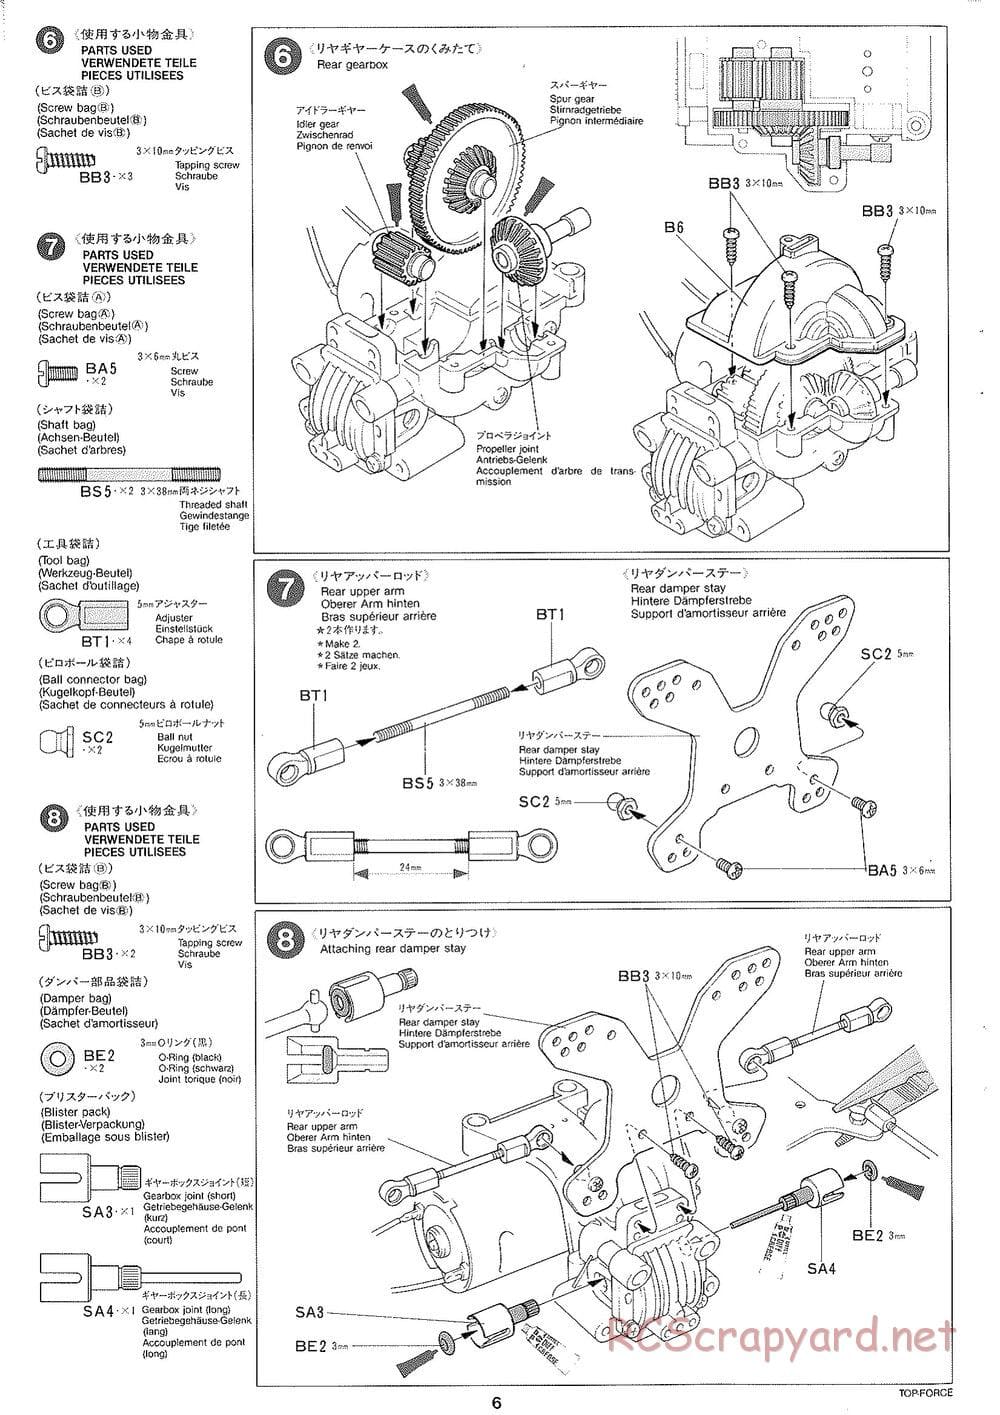 Tamiya - Top Force 2005 - DF-01 Chassis - Manual - Page 6